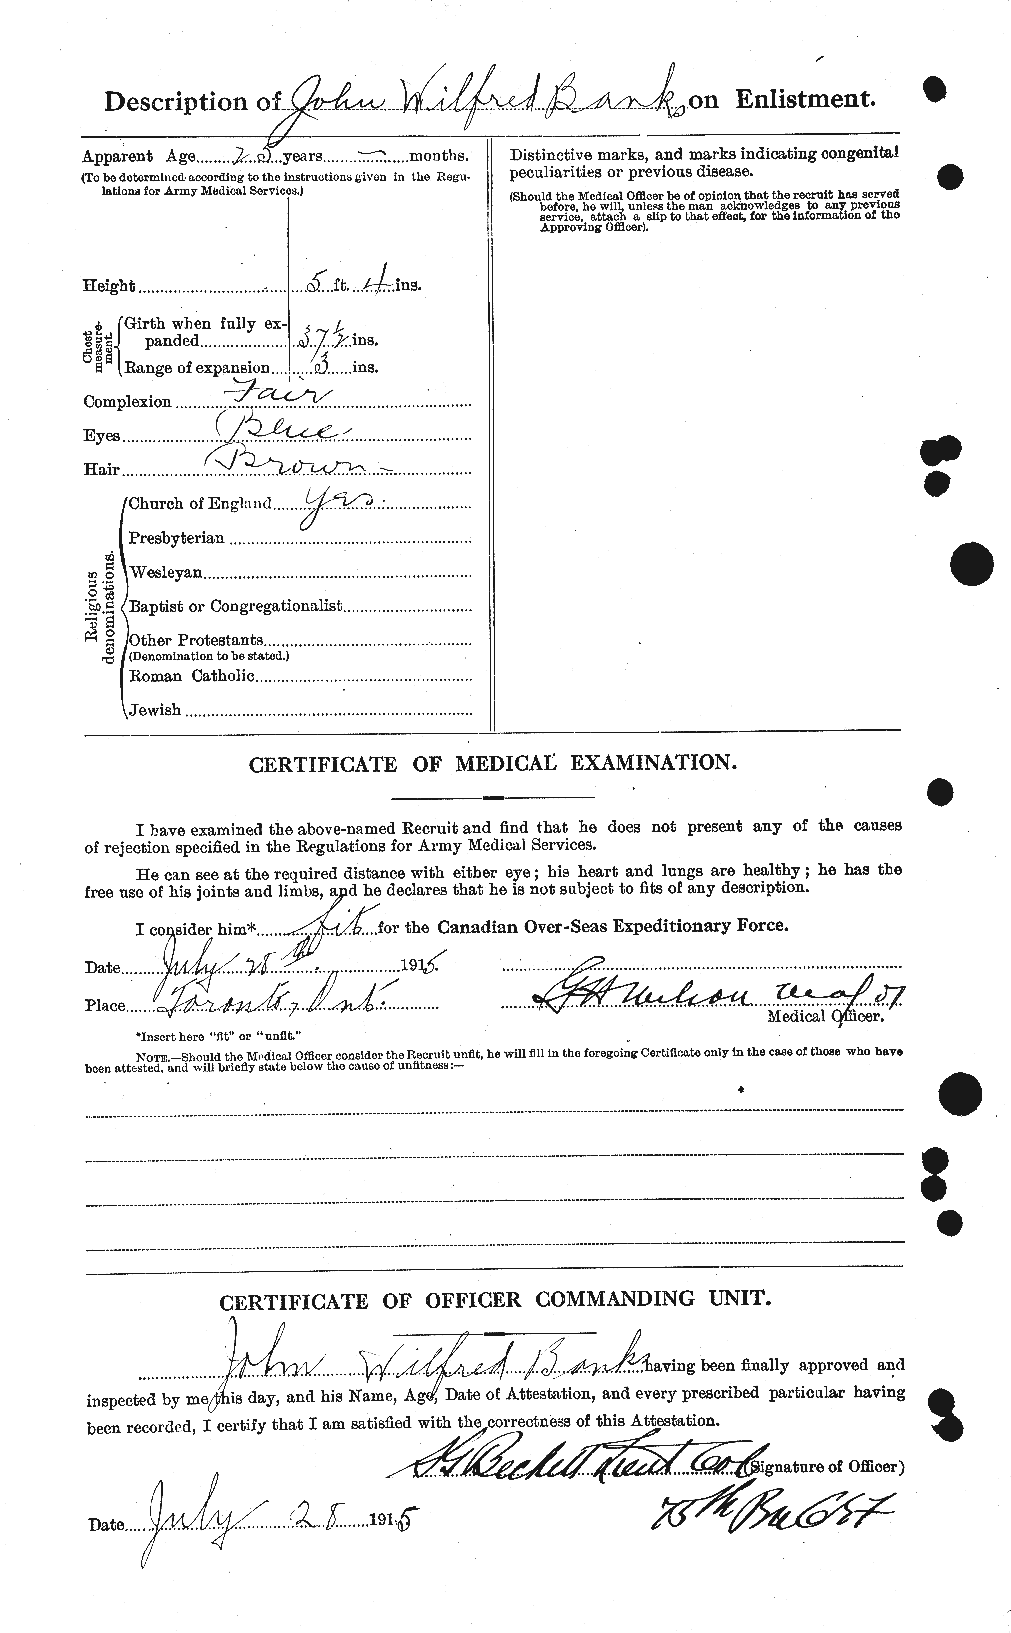 Personnel Records of the First World War - CEF 224976b